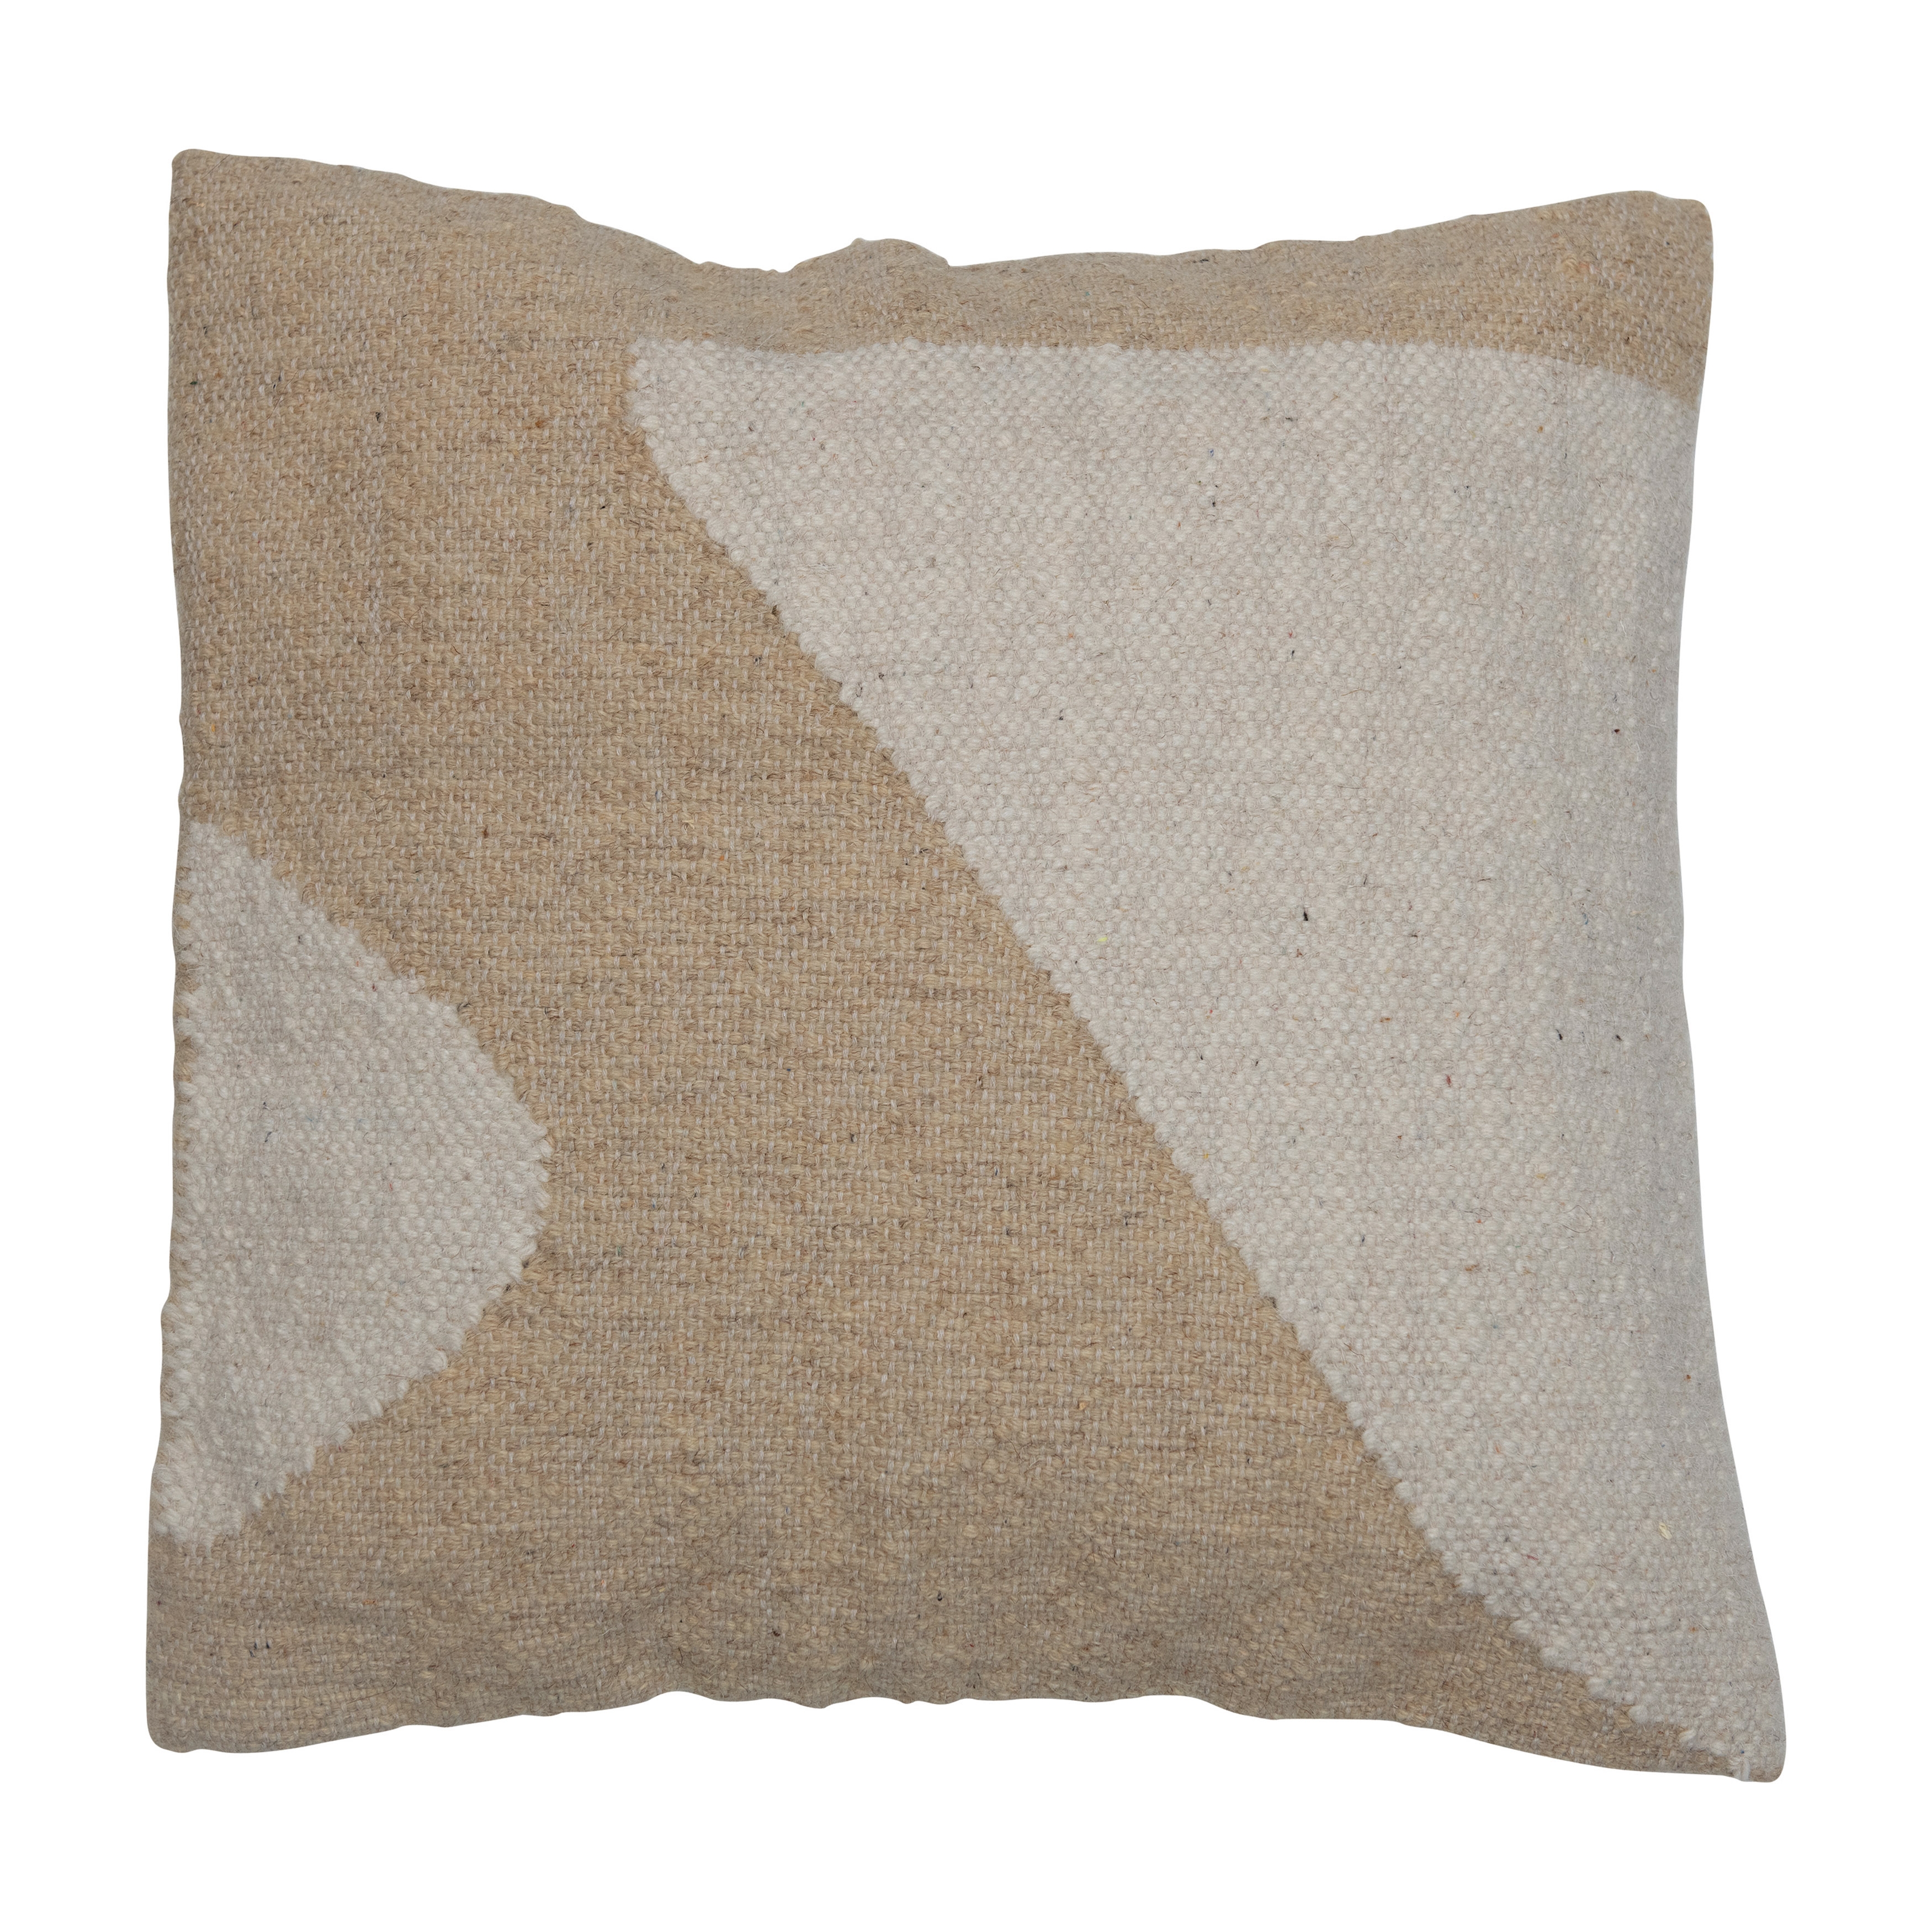 Rustic Modern Decorative Woven Cotton and Wool Square Kilim Pillow - Image 0